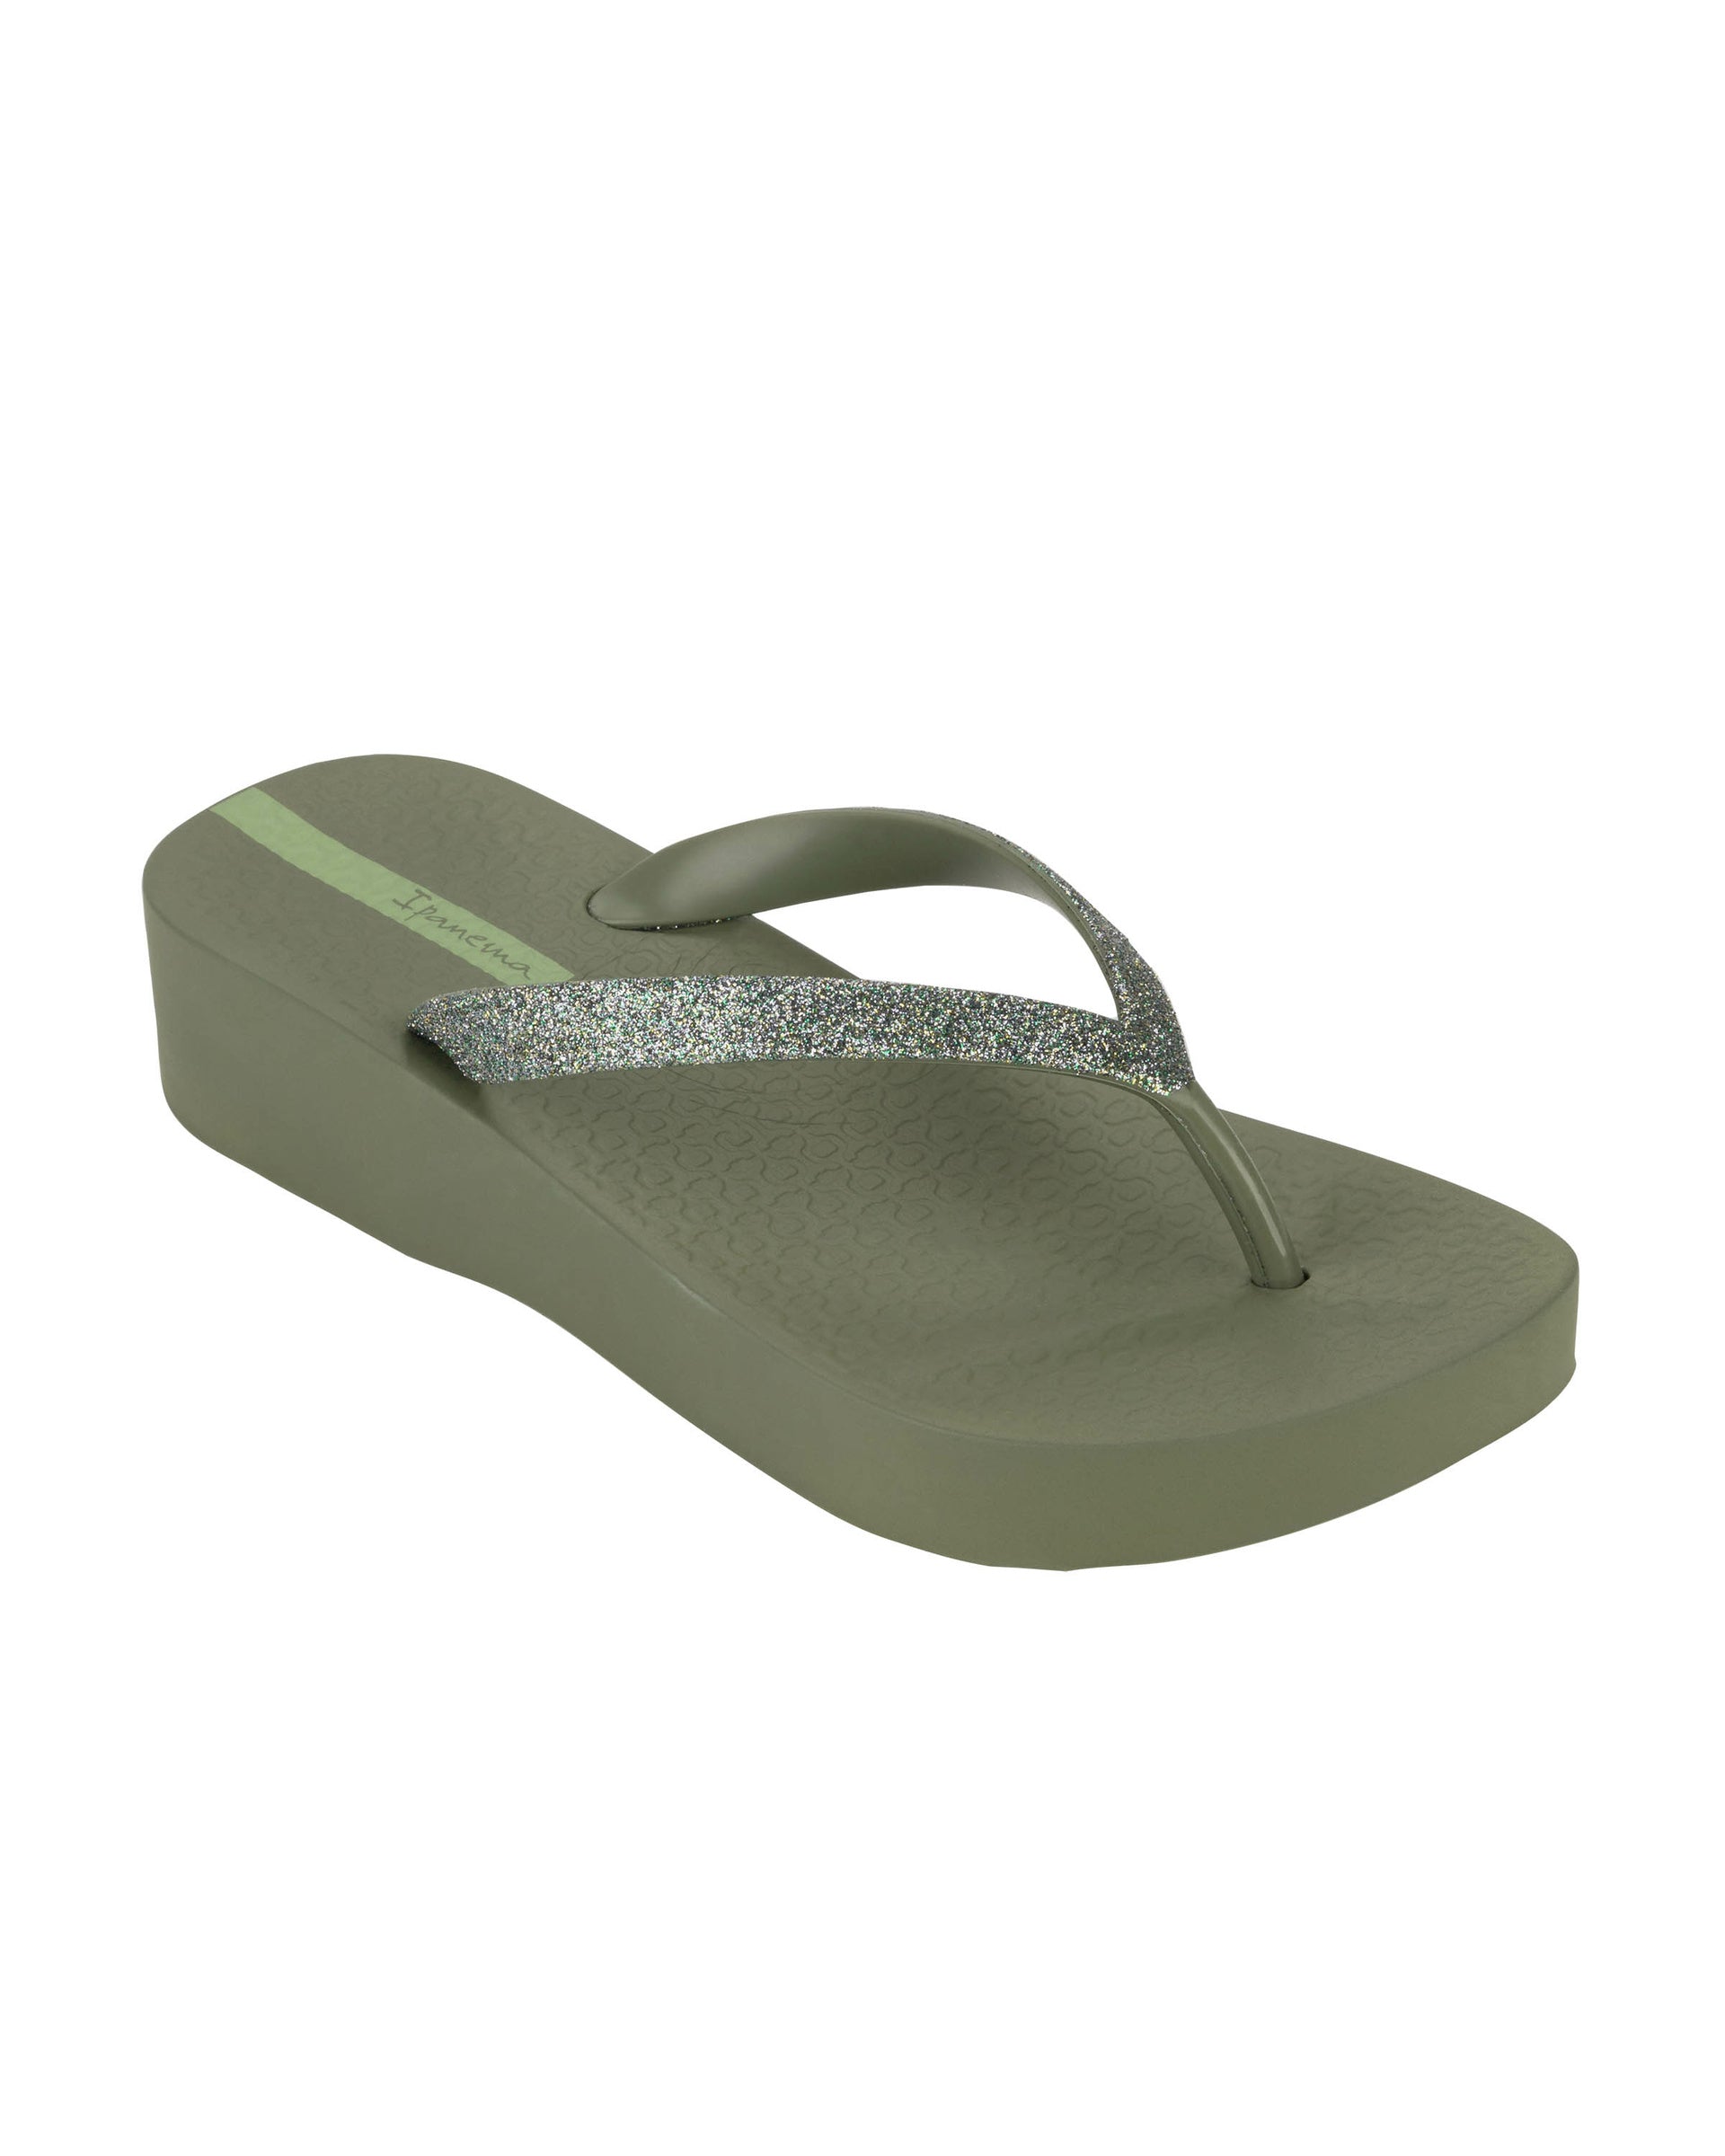 Angled view of a green Ipanema Mesh Chic women's wedge flip flop with glitter green straps.